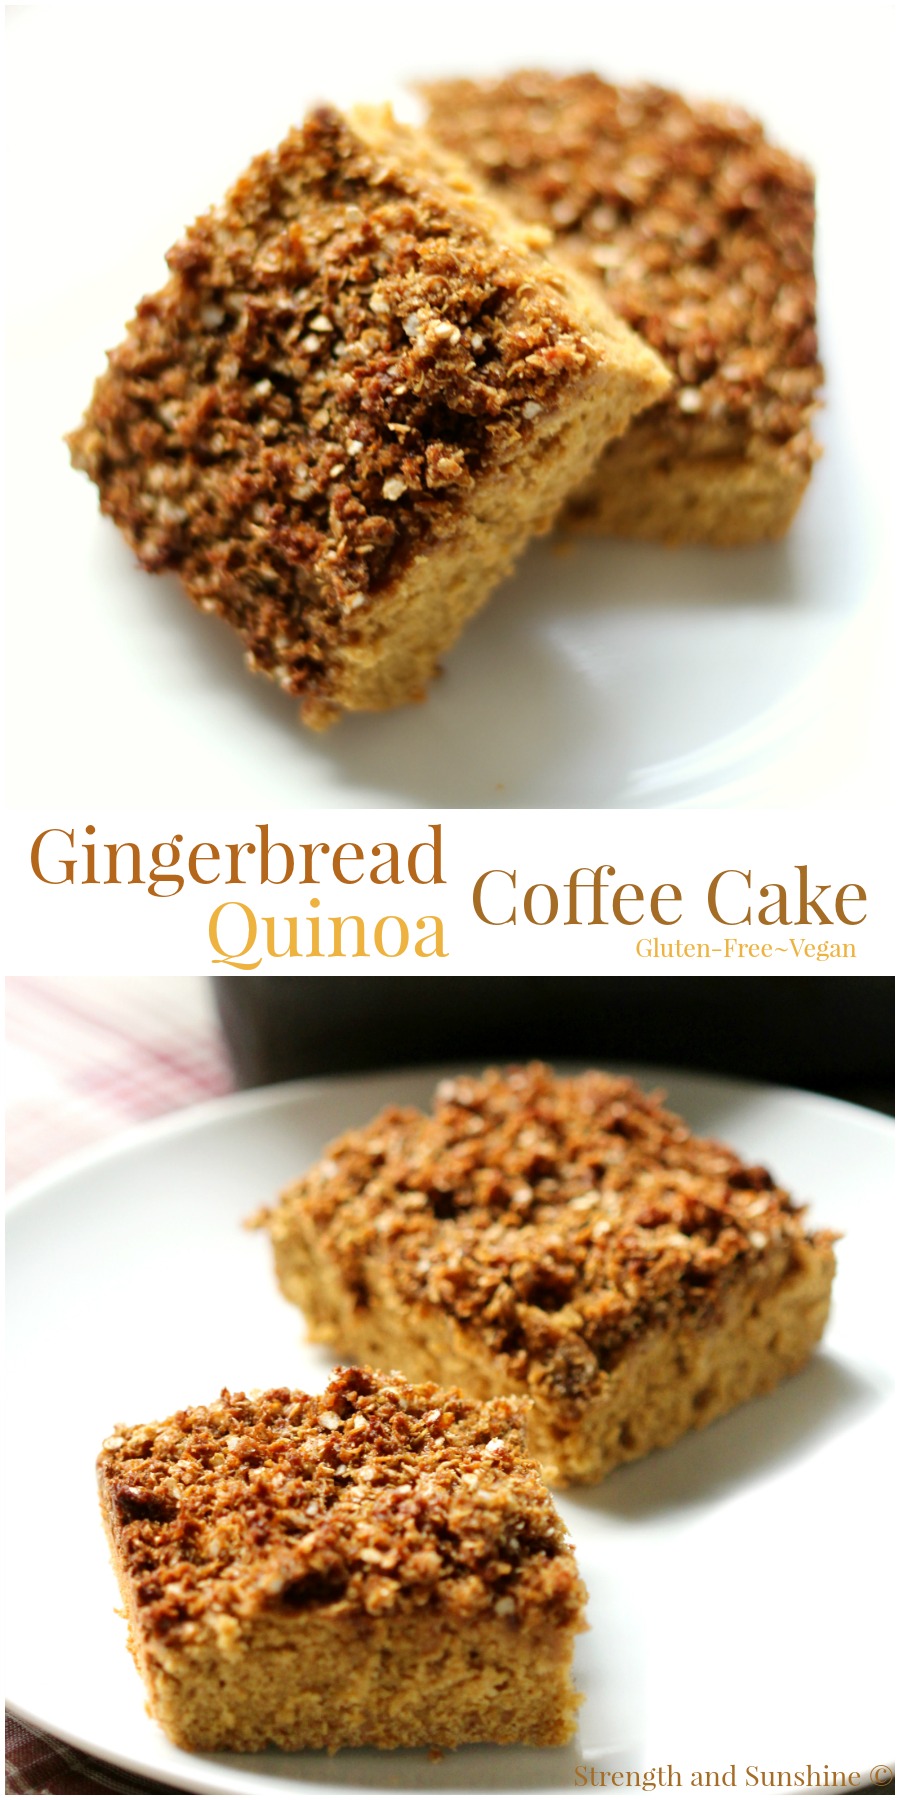 Gingerbread Quinoa Coffee Cake | Strength and Sunshine @RebeccaGF666 Get cozy with some coffee and a slice of this gingerbread quinoa coffee cake! A warm holiday flavor with the protein of quinoa, gluten-free and vegan, this healthy coffee cake is perfect for a winter breakfast, a weekend brunch, or healthy holiday dessert!